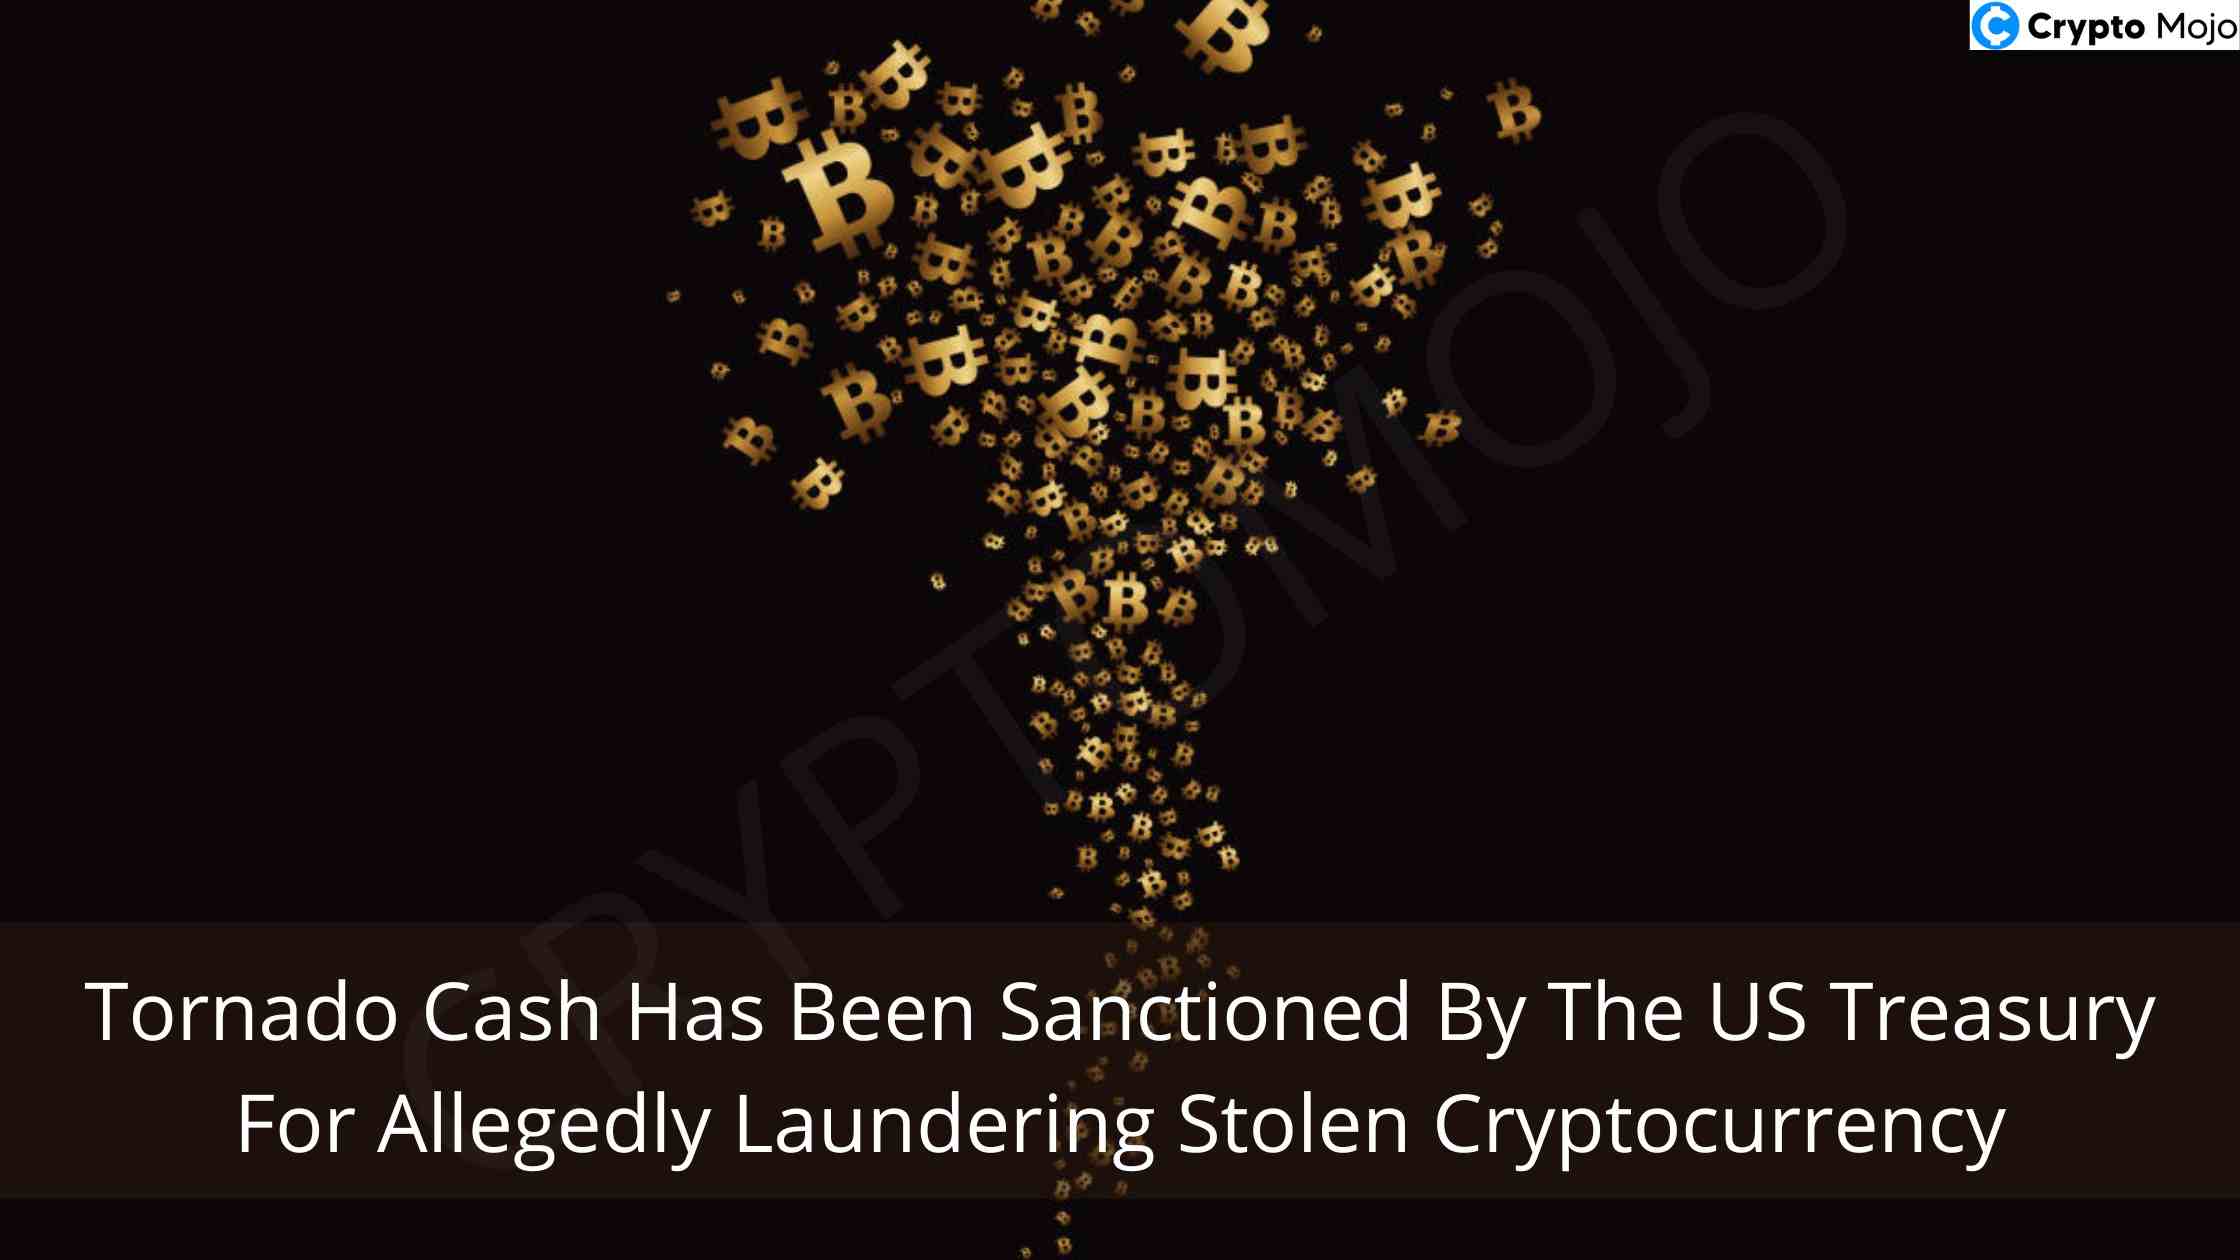 Tornado Cash Has Been Sanctioned By The US Treasury For Allegedly Laundering Stolen Cryptocurrency